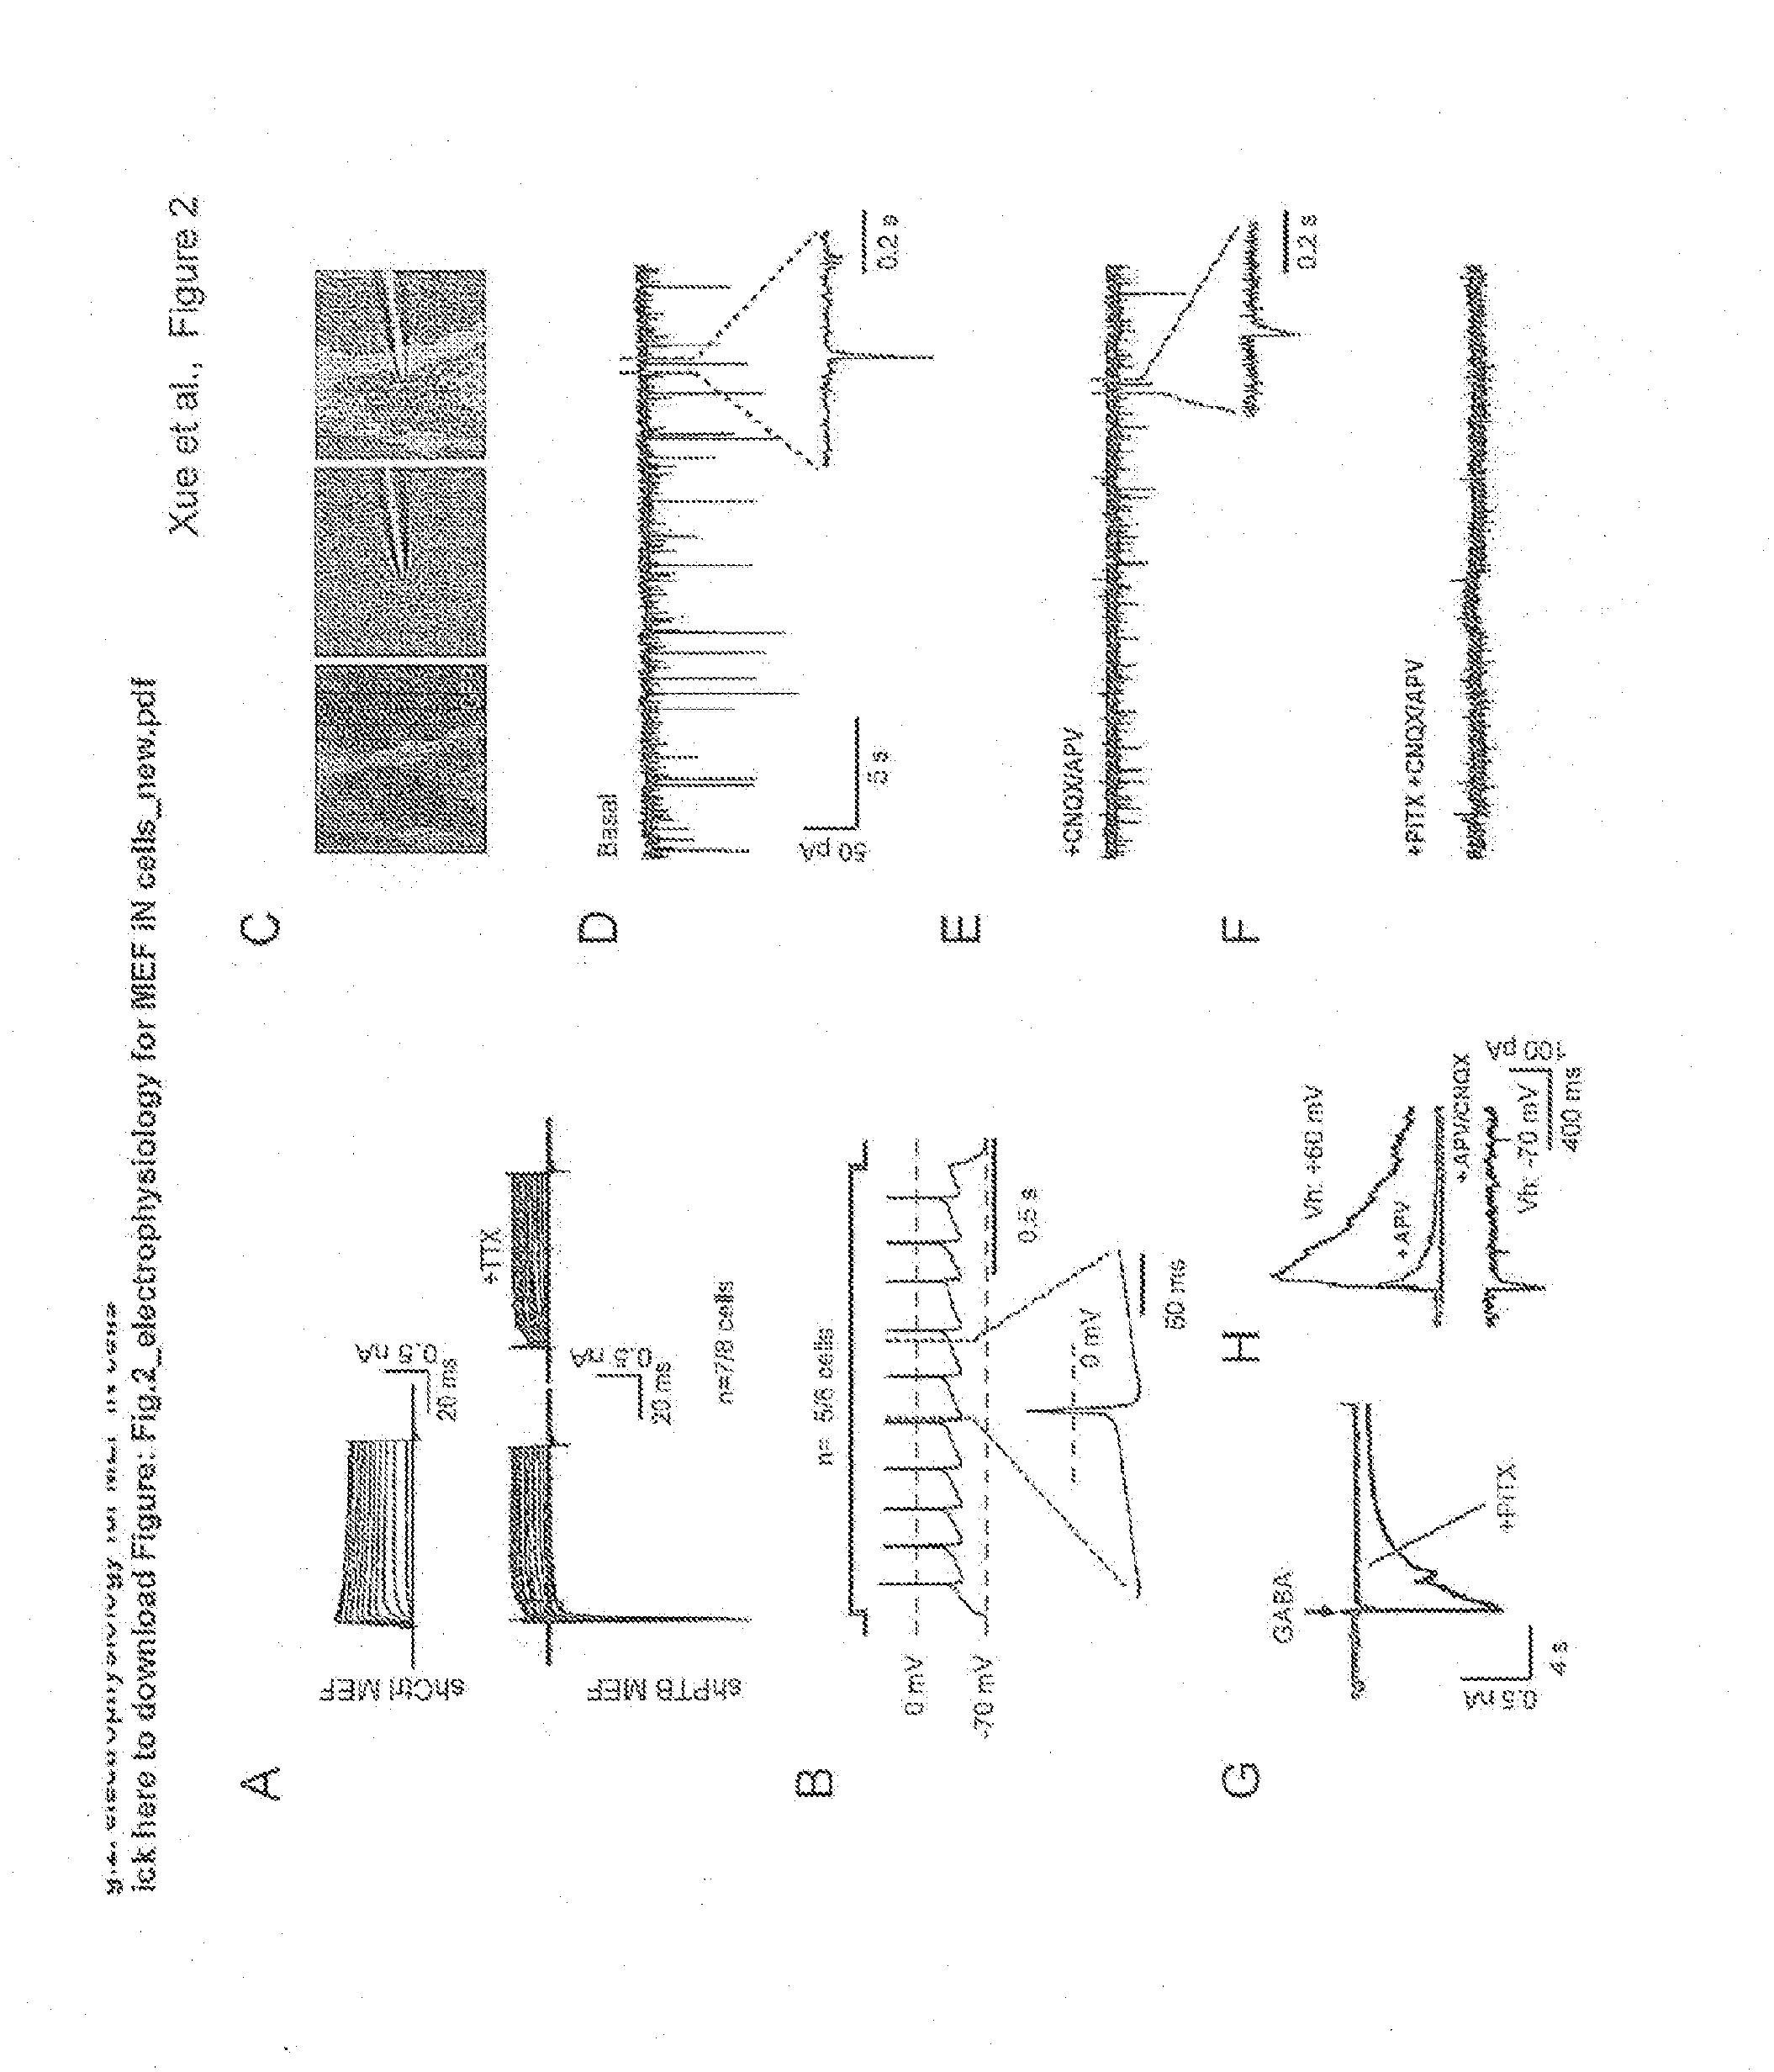 Methods for engineering non-neuronal cells into neurons and using newly engineered neurons to treat neurodegenerative diseases